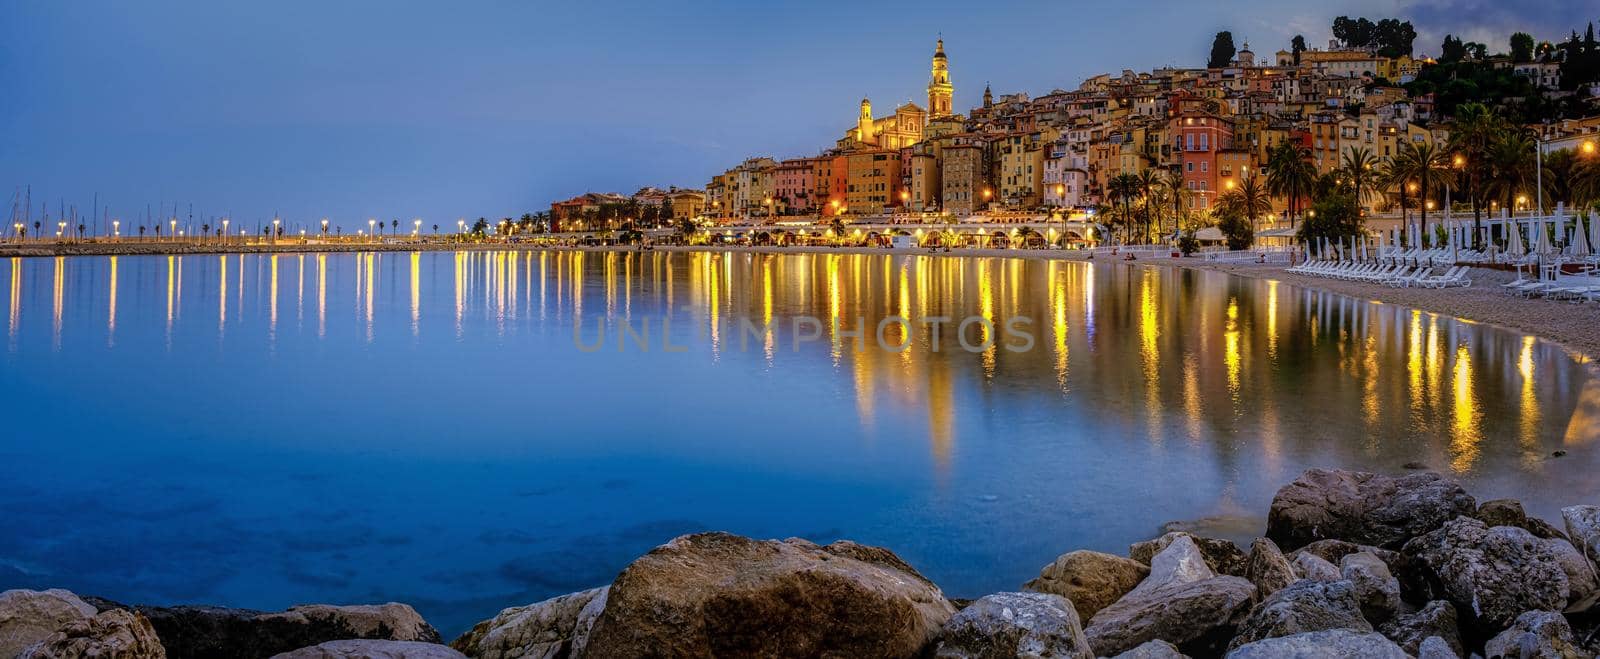 View on old part of Menton, Provence-Alpes-Cote d'Azur, France during summer by fokkebok